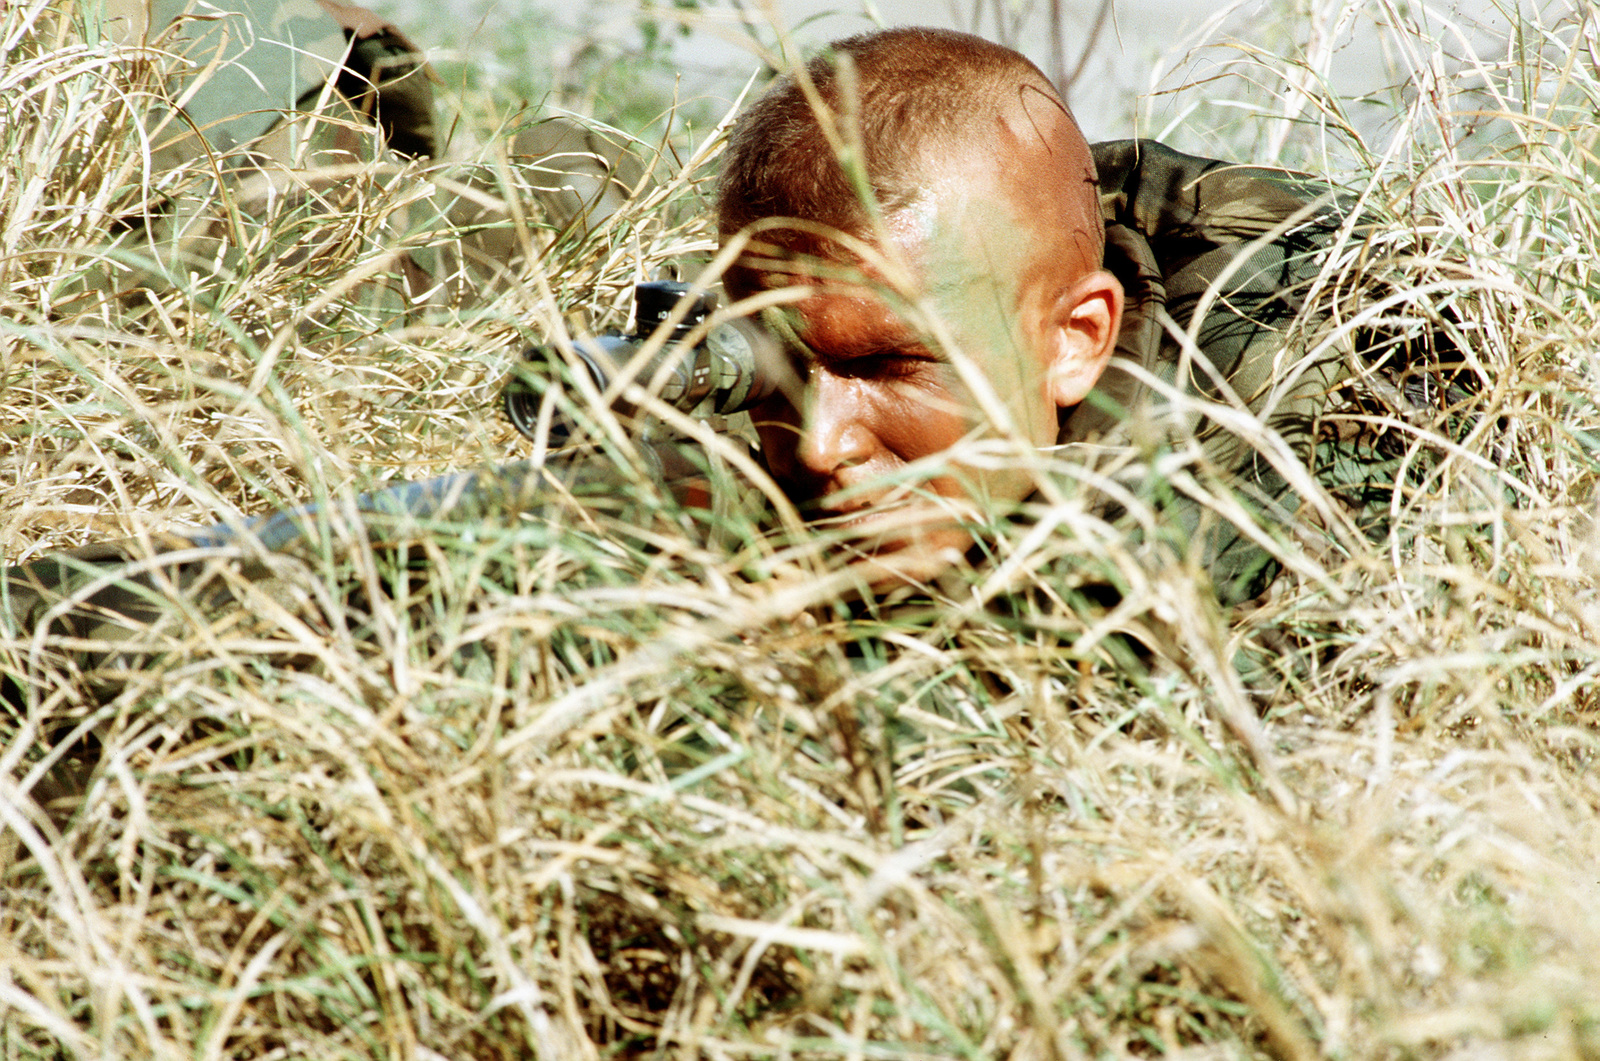 a-sniper-from-the-2nd-battalion-8th-marines-secures-the-area-the-marines-are-a514c4-1600.jpg